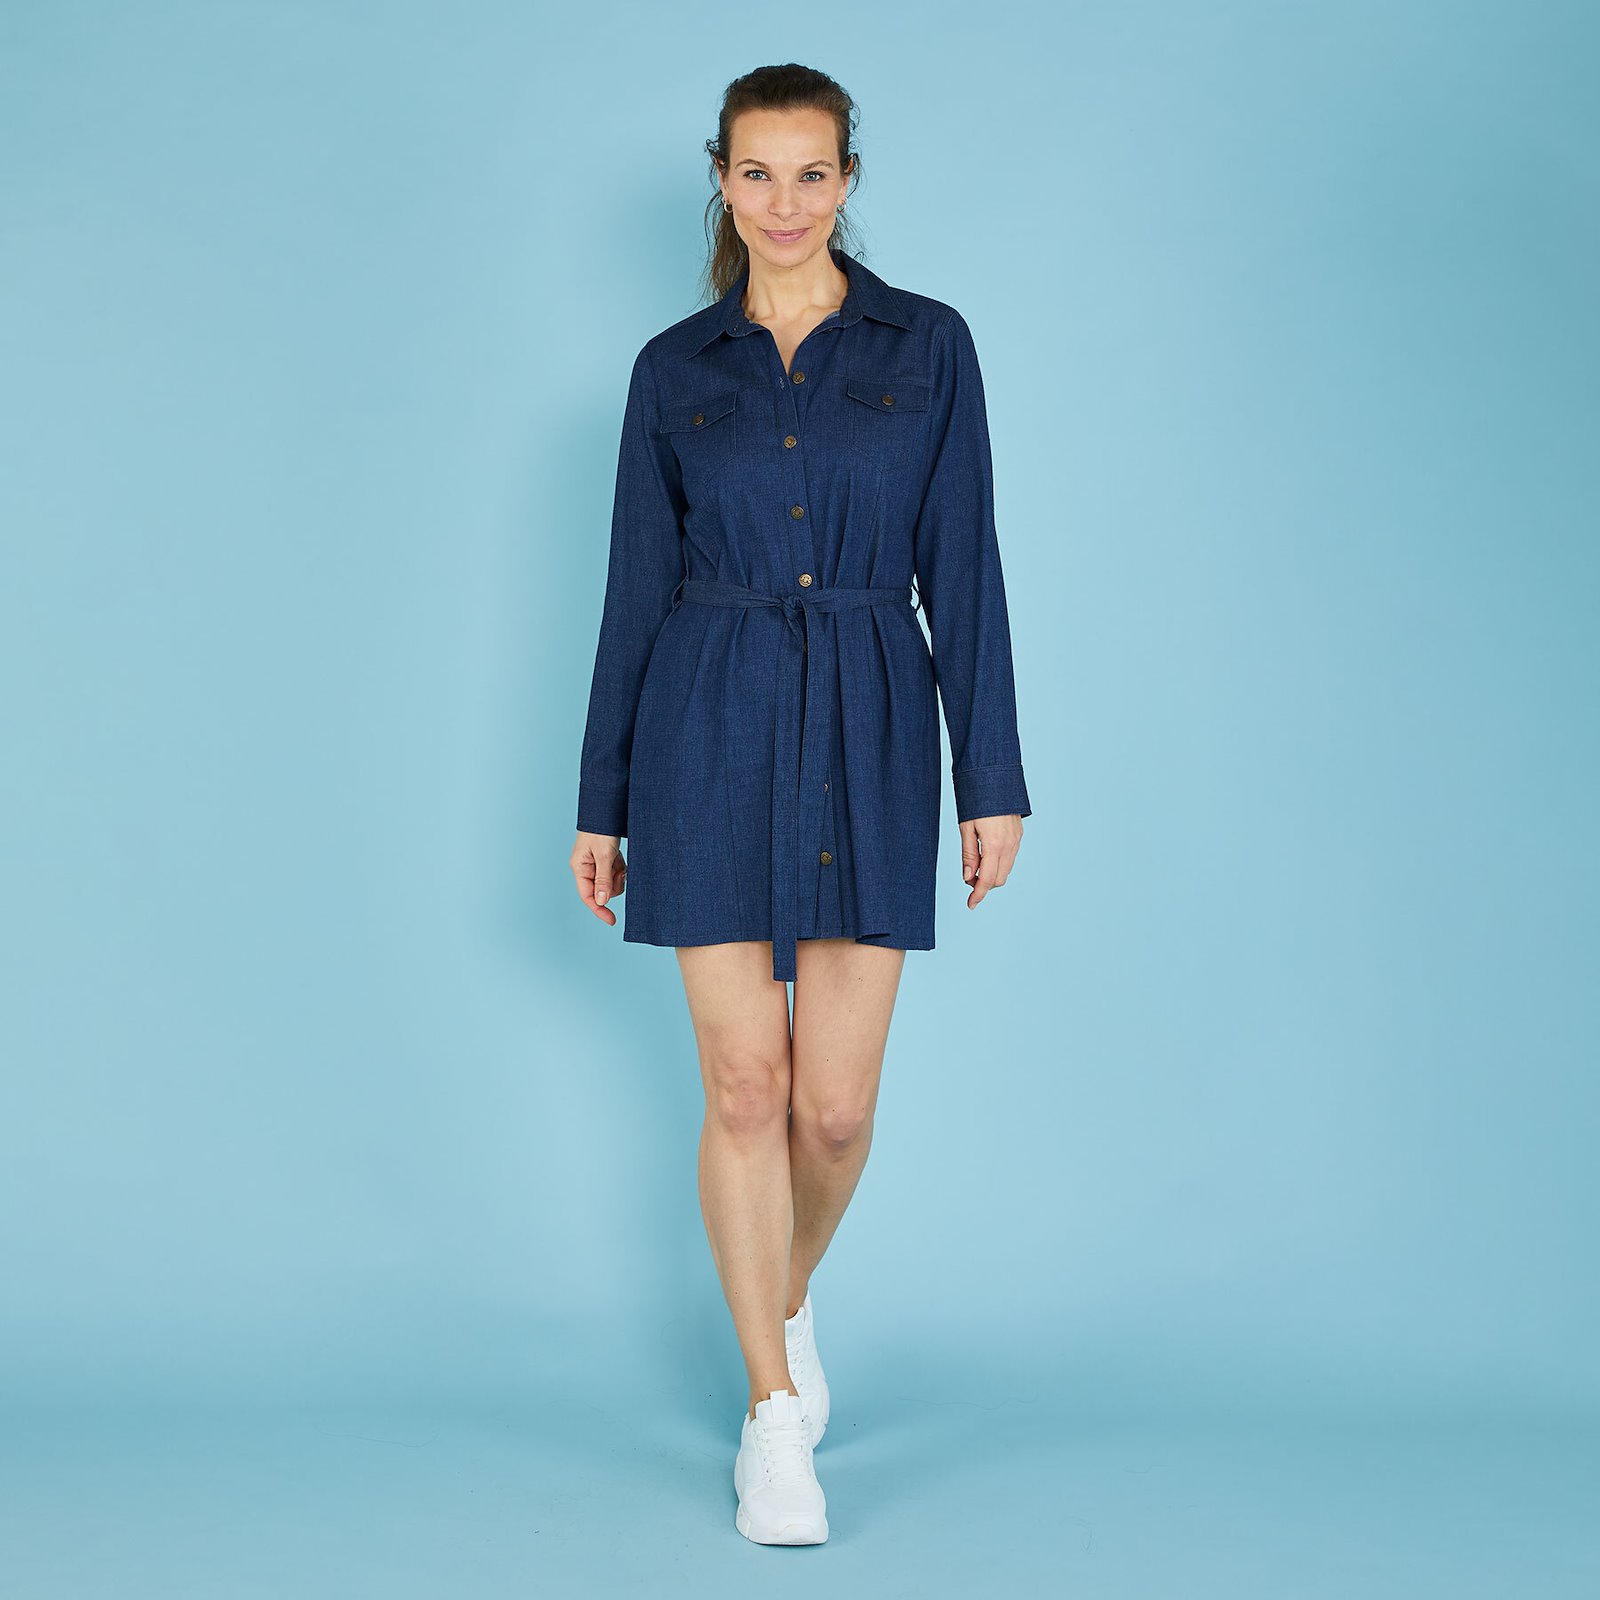 Fitted shirt dress with tie belt, 44/16 p23176000_p23176001_p23176002_p23176003_p23176004_pack_d